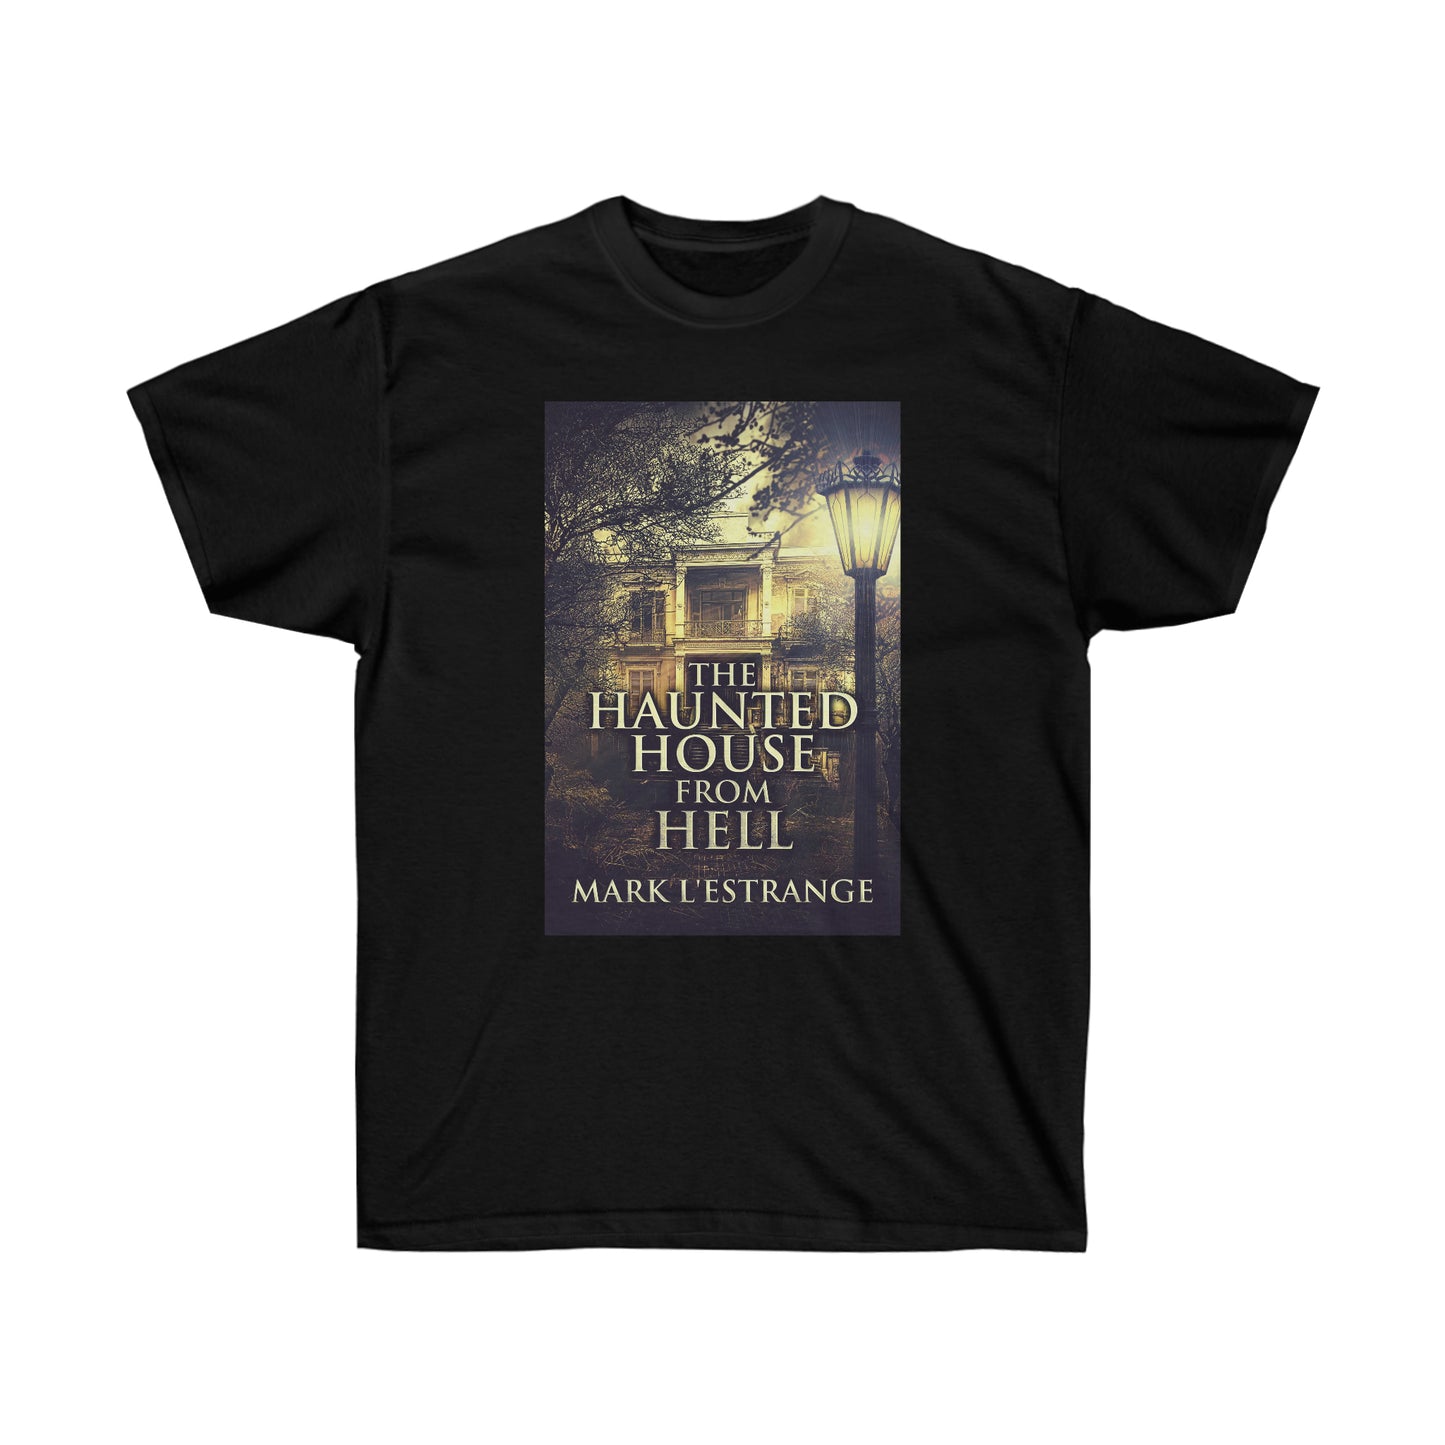 The Haunted House From Hell - Unisex T-Shirt